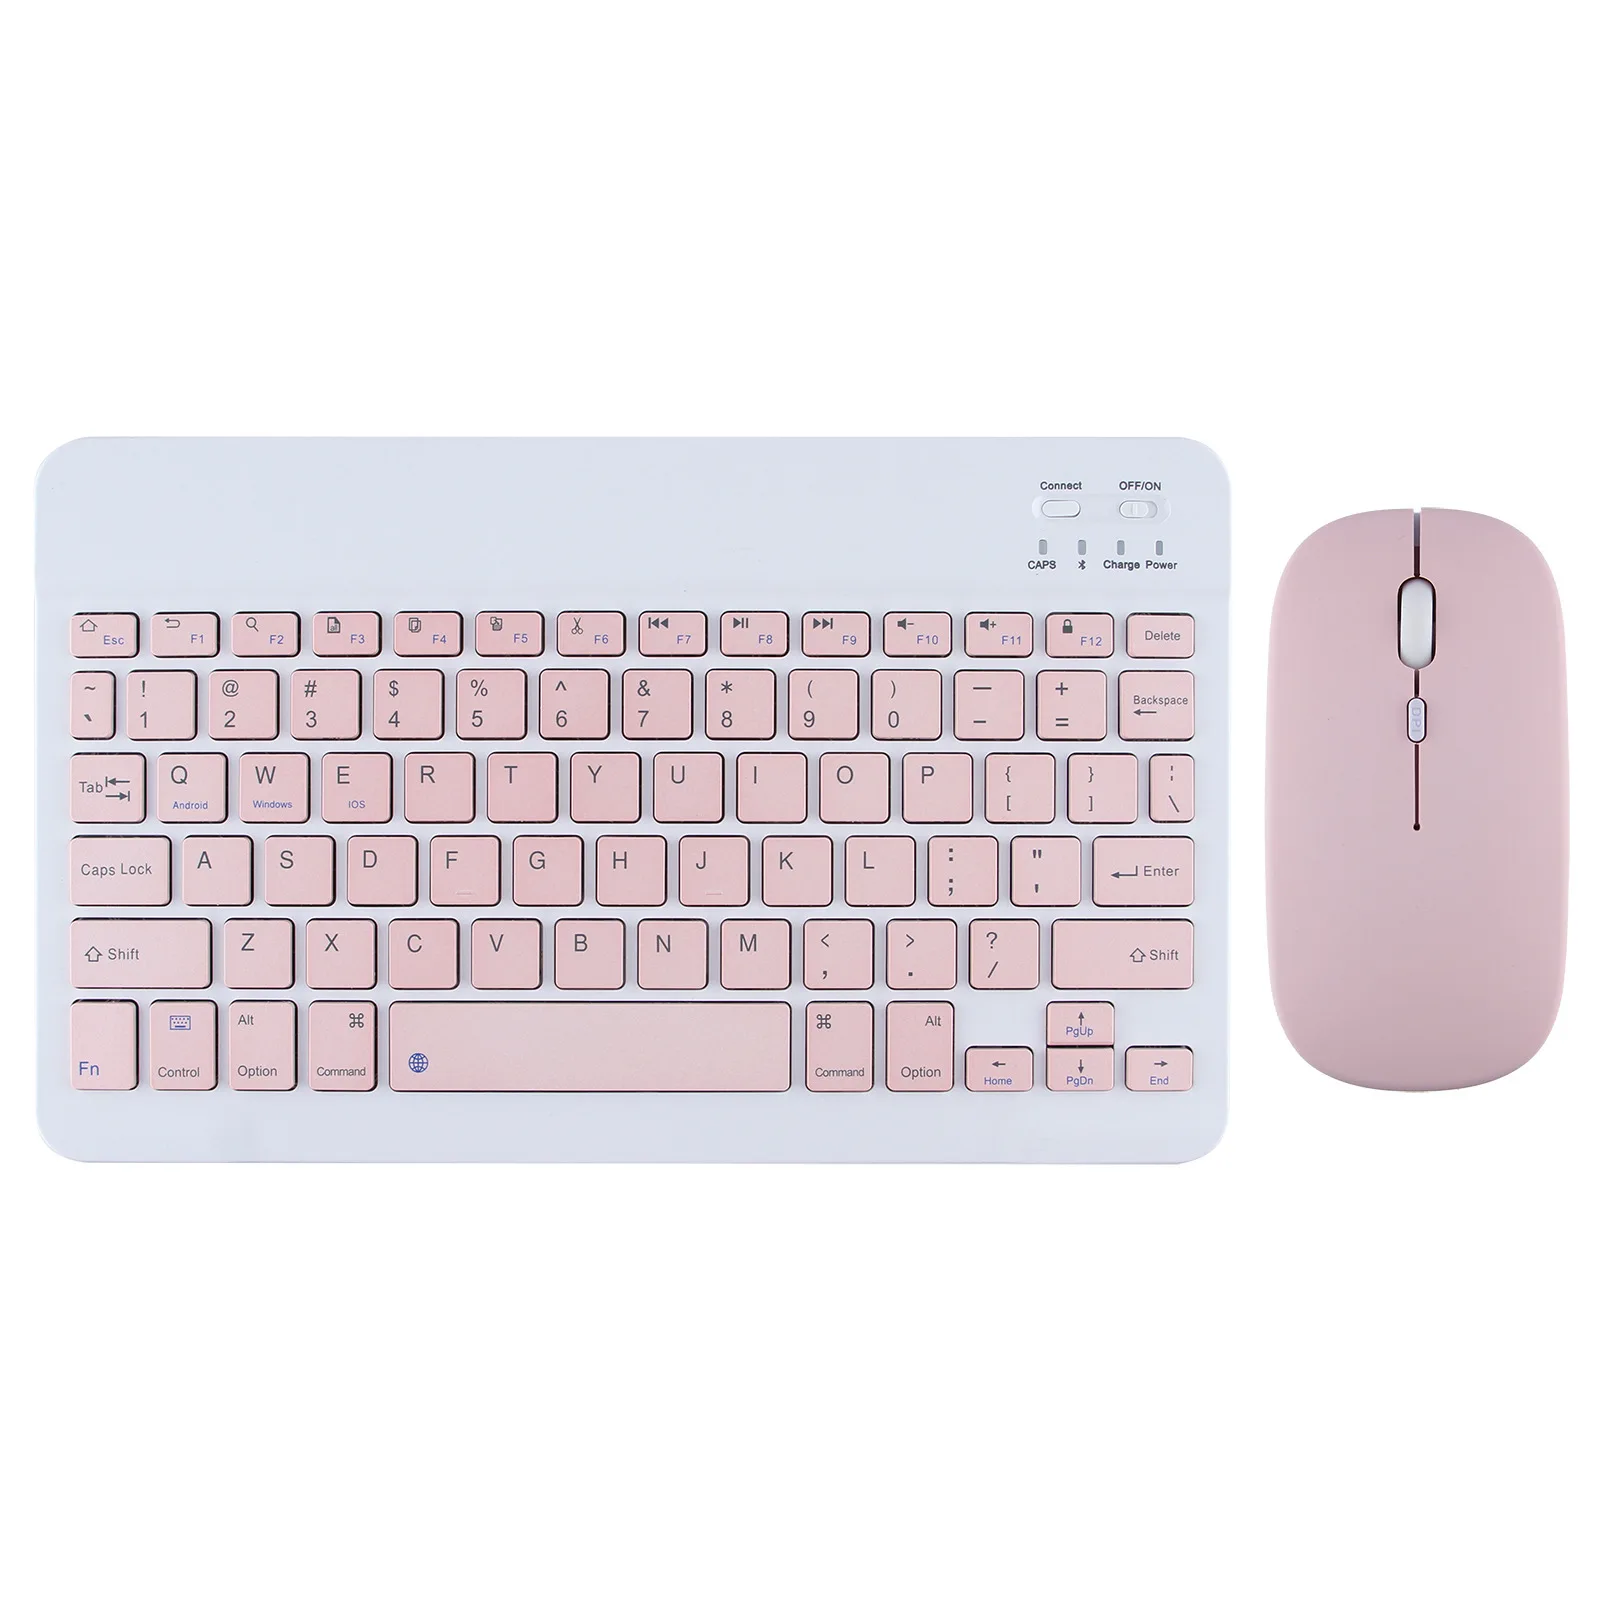 10 inch wireless keyboard and mouse